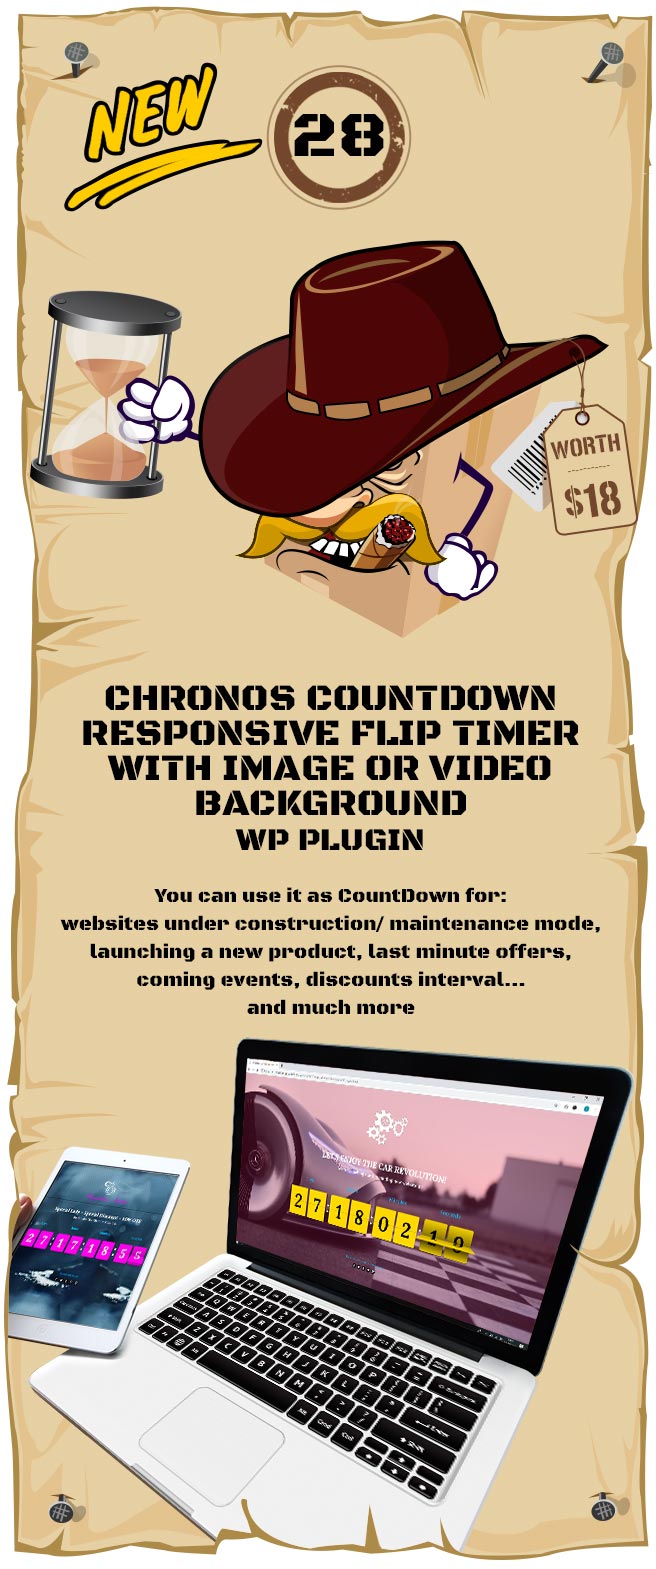 Chronos CountDown - Responsive Flip Timer With Image or <a href=